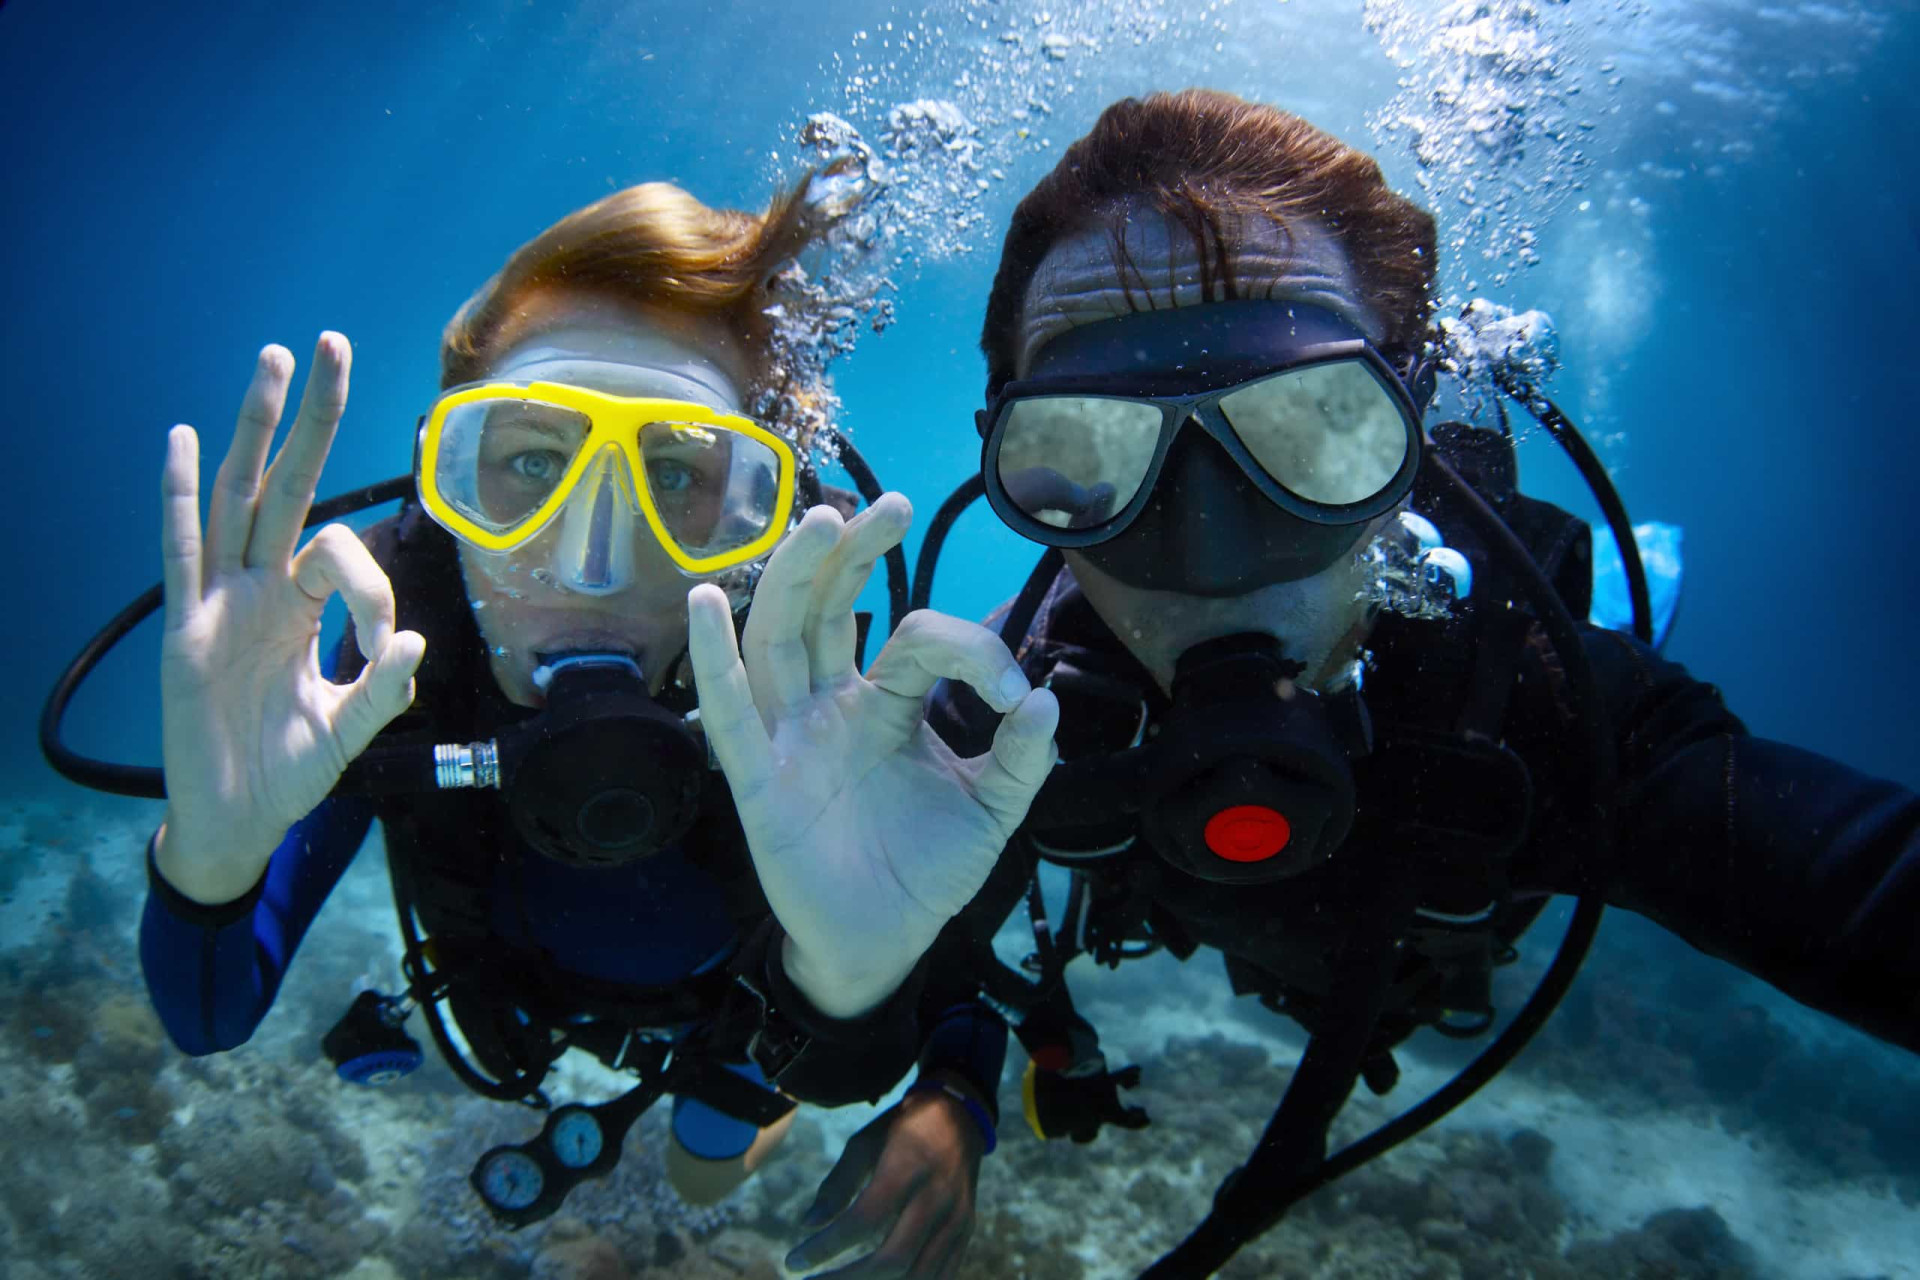 <p>If you have a passion for scuba diving and want an extraordinary life, become a diving instructor. The world underwater is a supremely beautiful and increasingly fragile environment, and promoting ocean conservation is just one aspect of this fascinating job. </p><p><a href="https://www.msn.com/en-us/community/channel/vid-7xx8mnucu55yw63we9va2gwr7uihbxwc68fxqp25x6tg4ftibpra?cvid=94631541bc0f4f89bfd59158d696ad7e">Follow us and access great exclusive content every day</a></p>